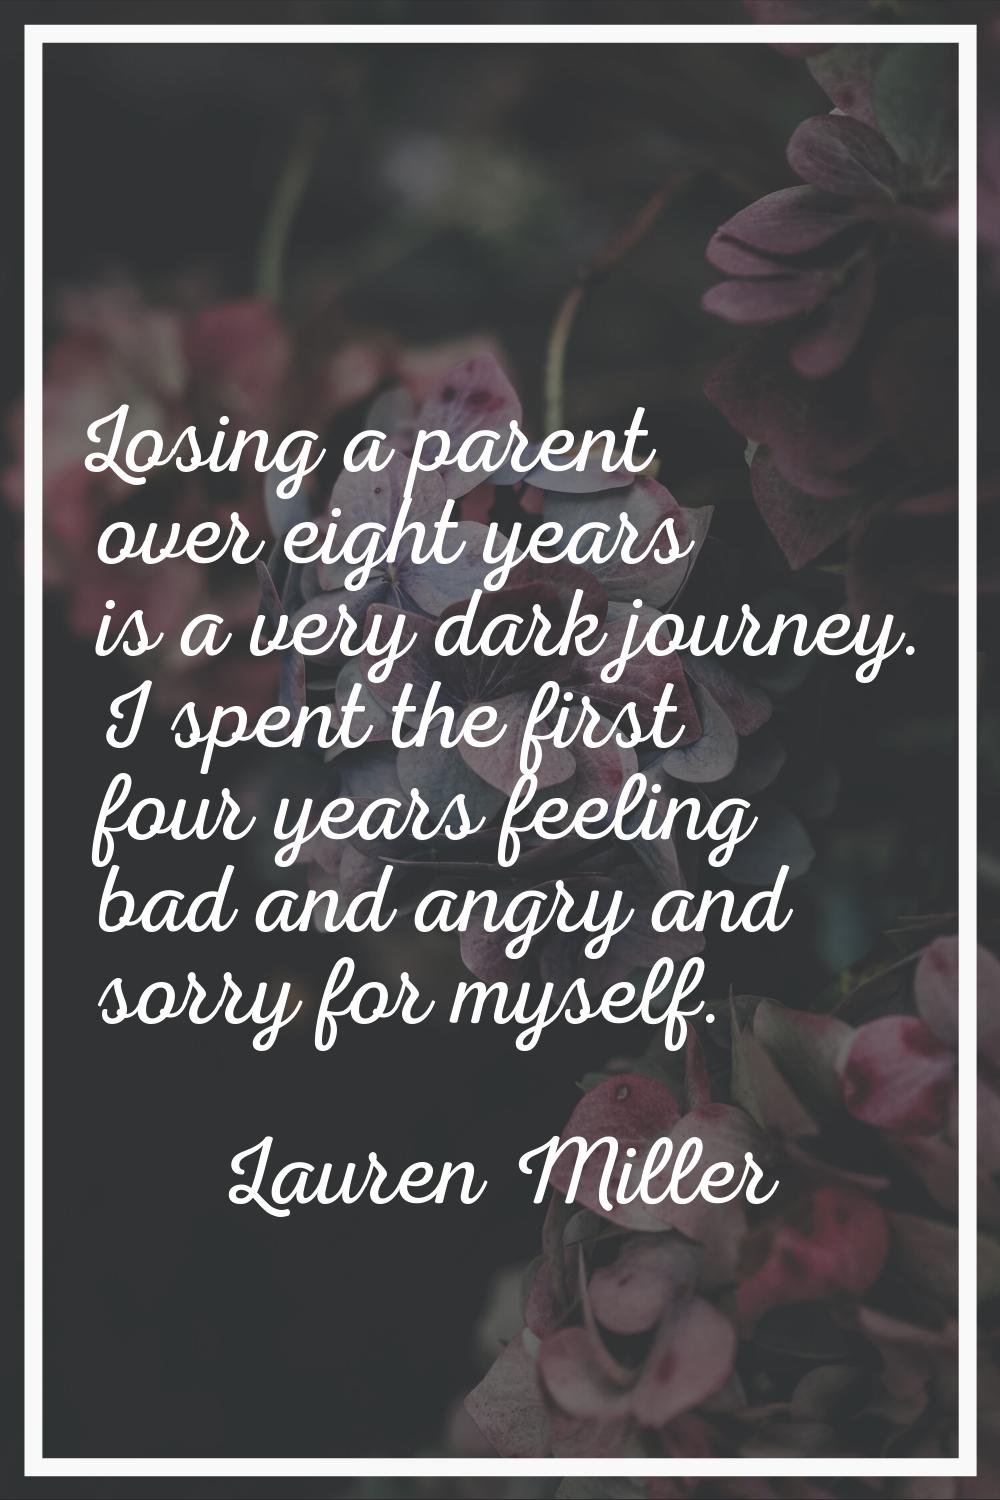 Losing a parent over eight years is a very dark journey. I spent the first four years feeling bad a